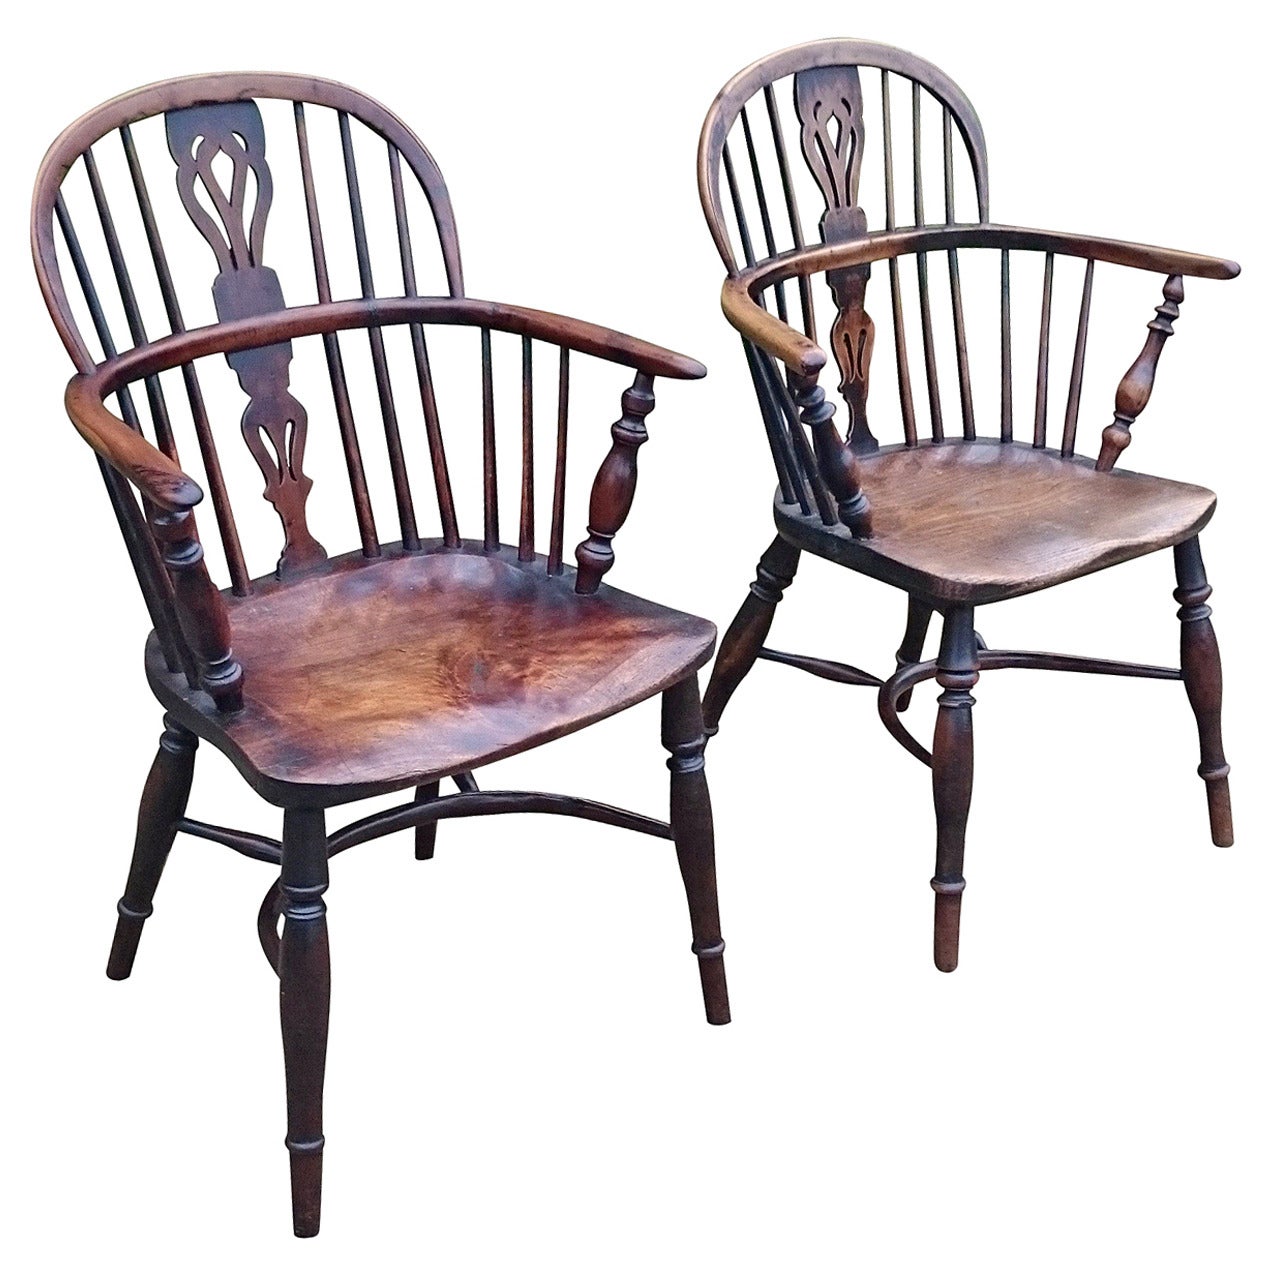 Two Antique Windsor Chairs